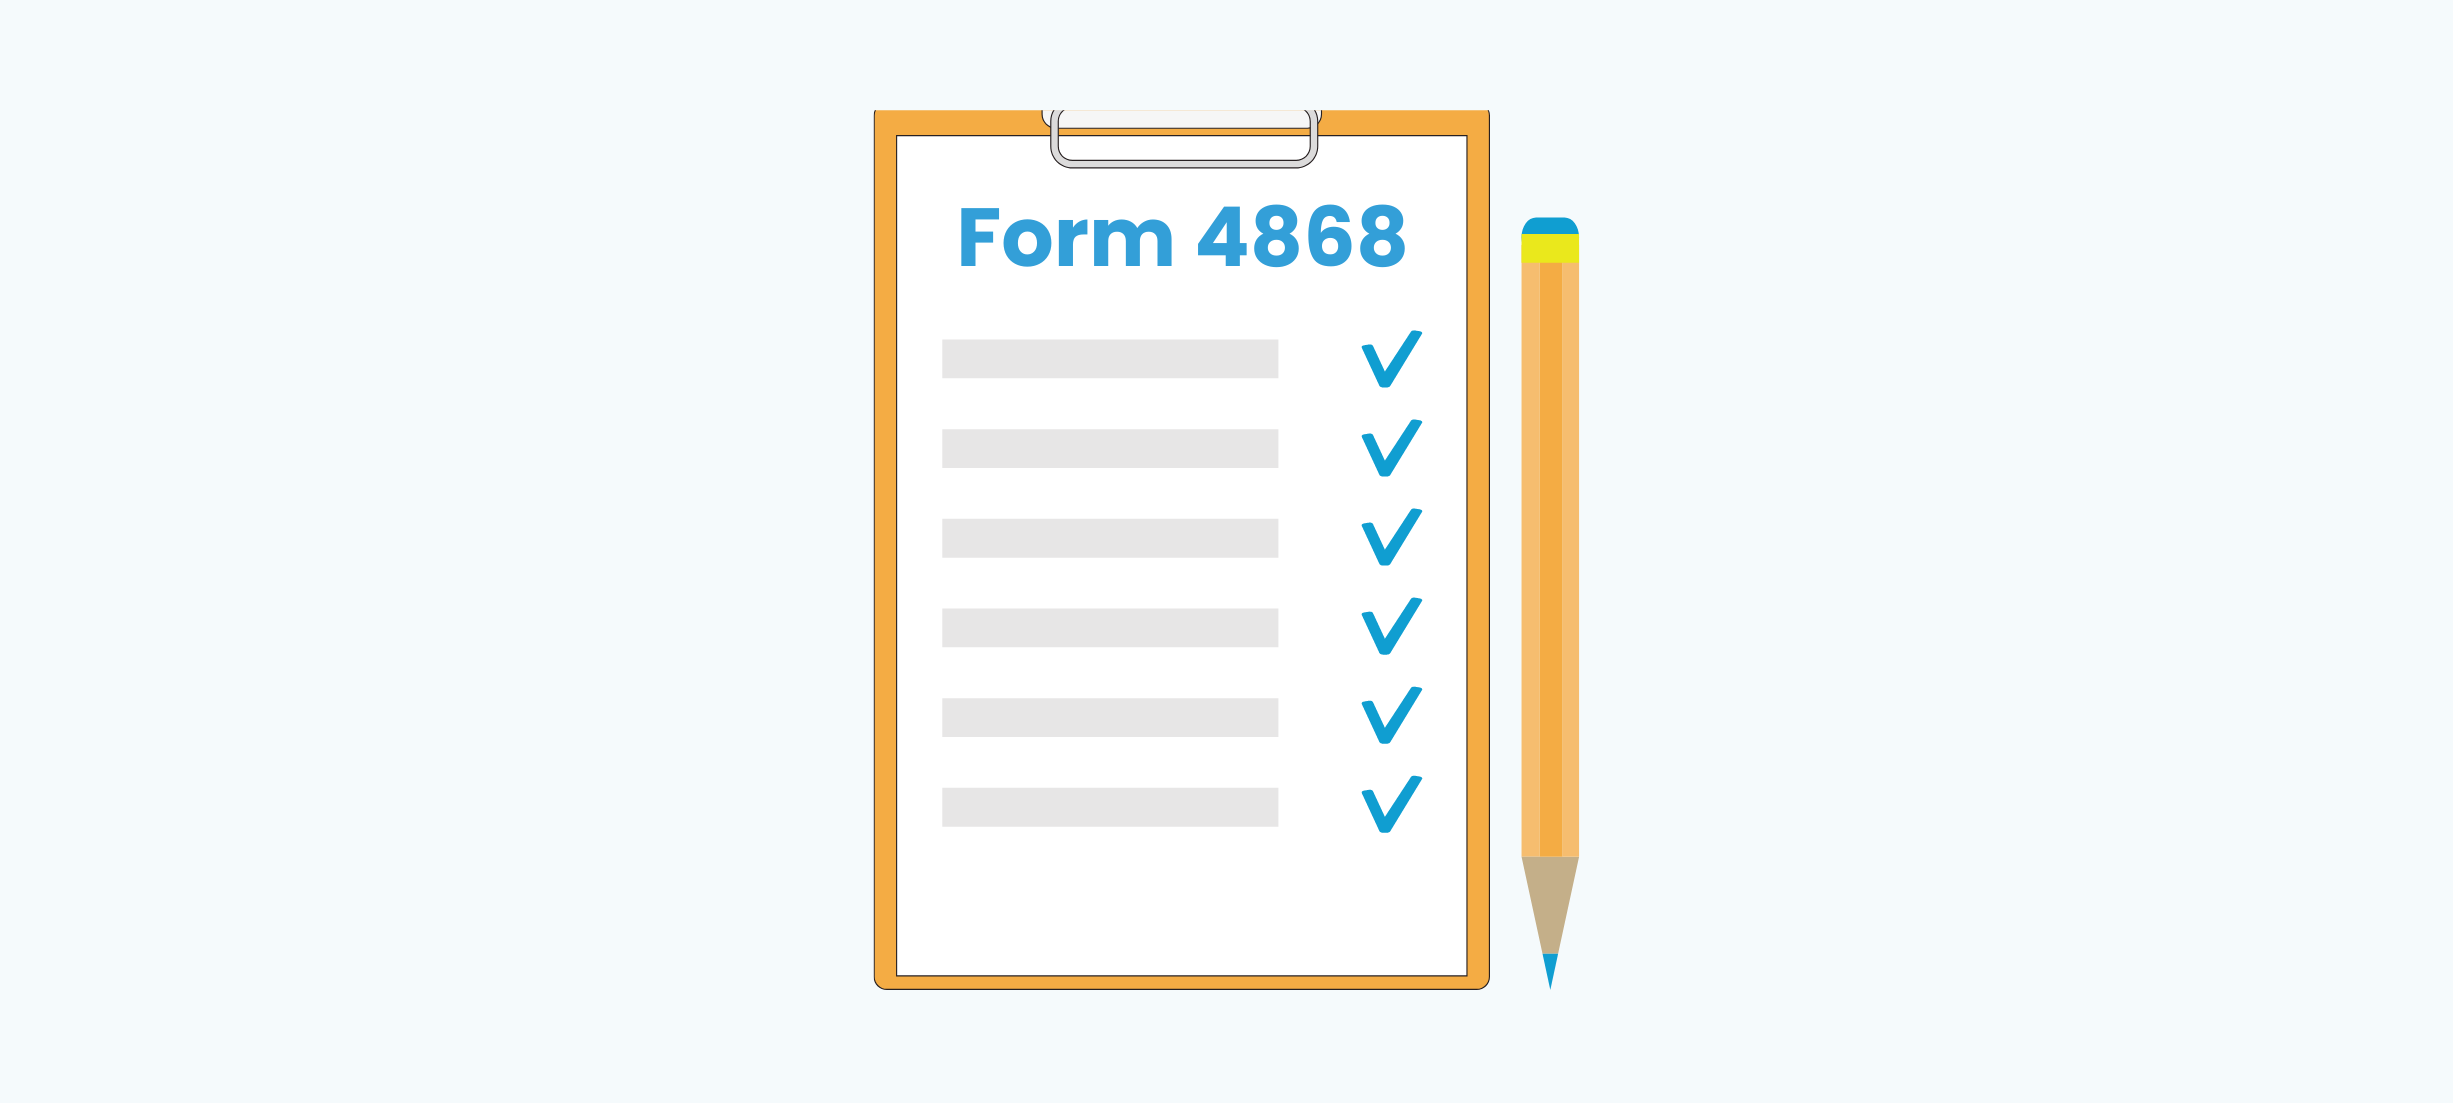 How to File IRS Tax Extension Form 4868?